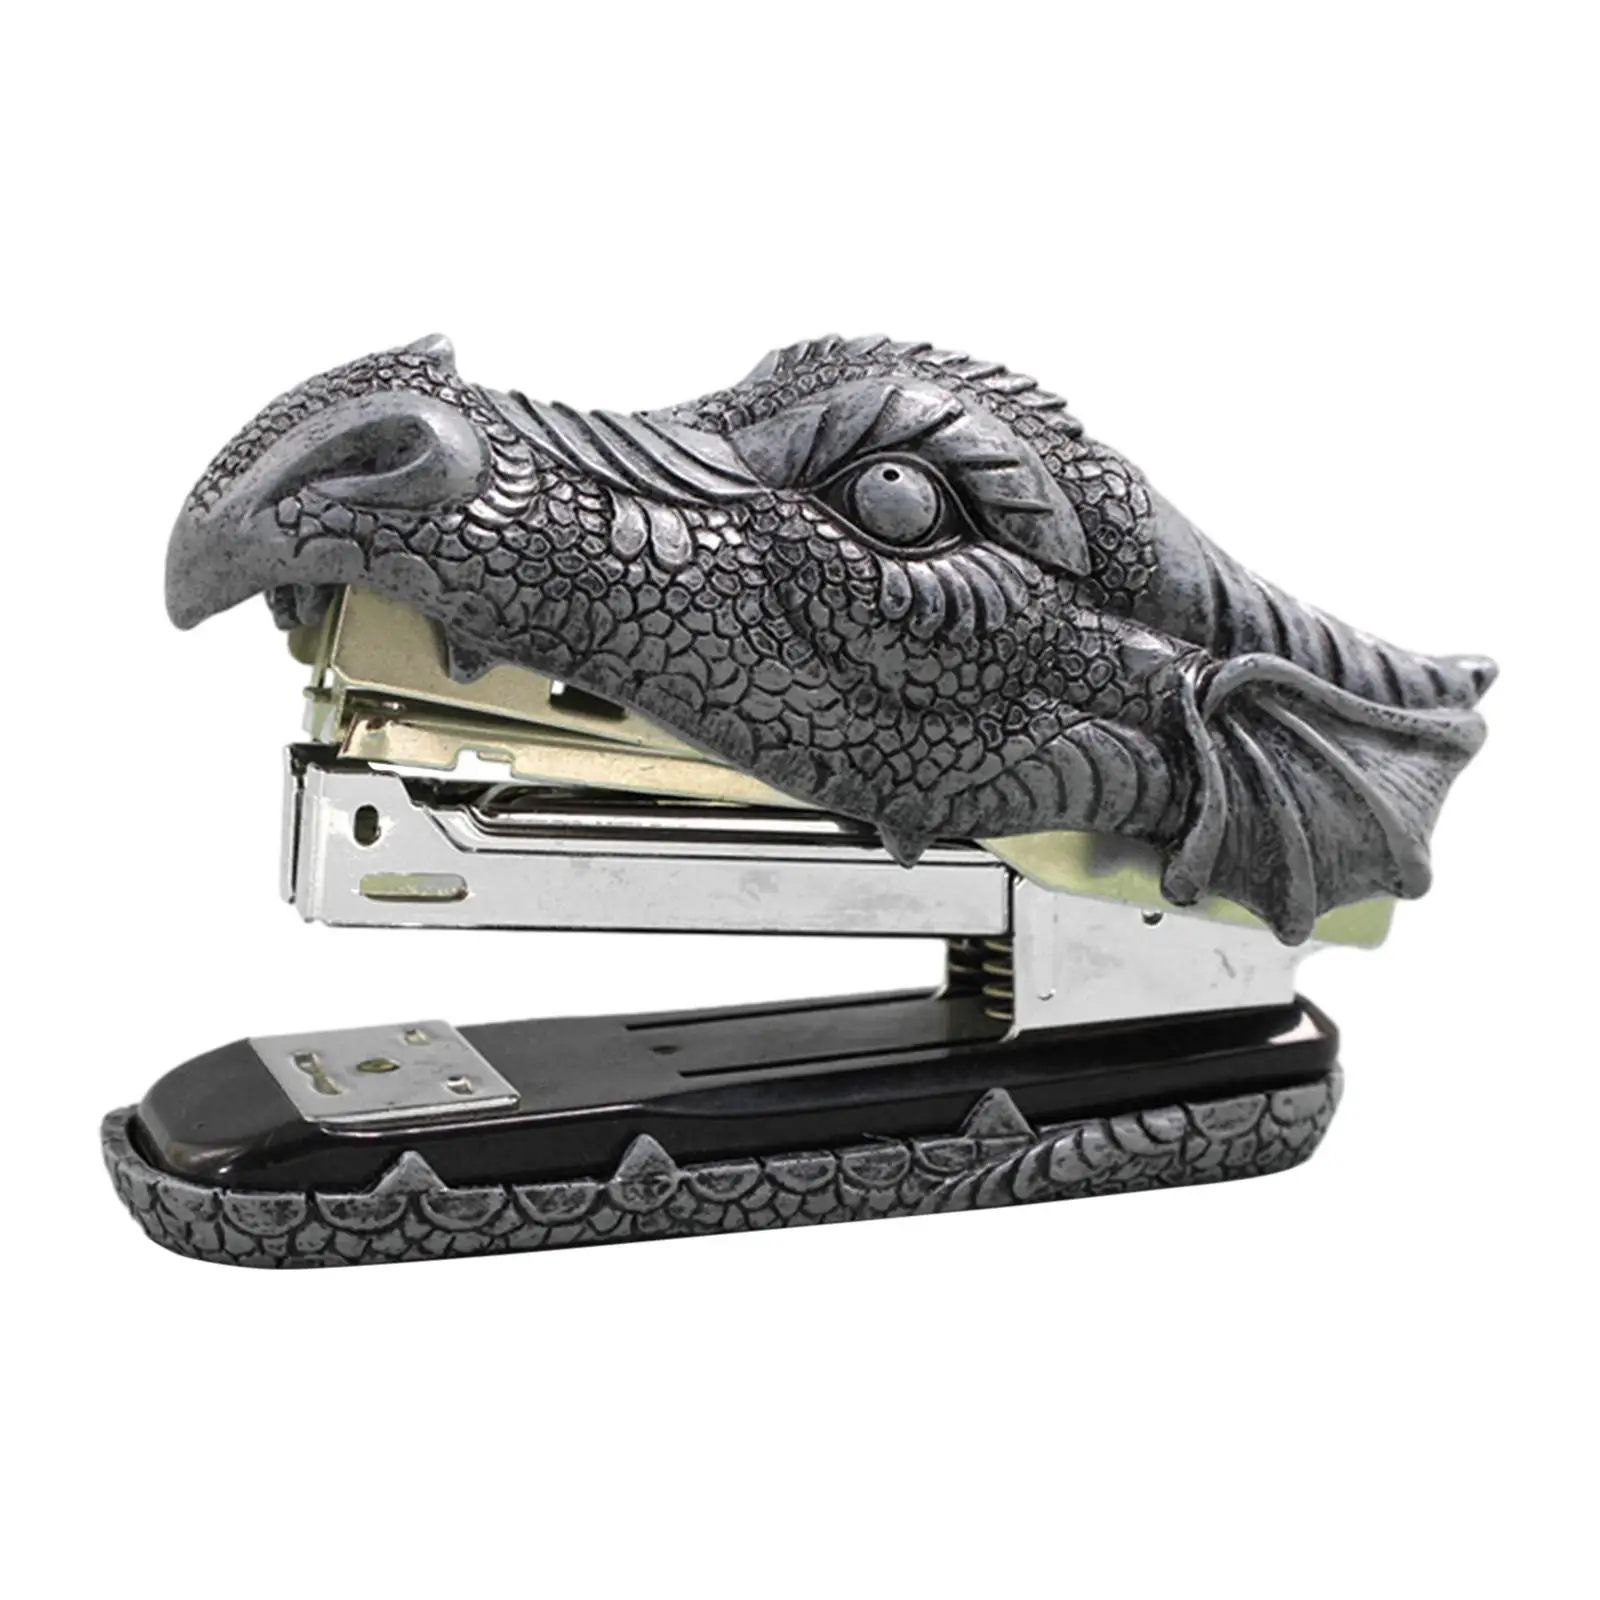 Dragon Head Stapler Office Desktop Accessory Home Decor Resin Stationery Collectible